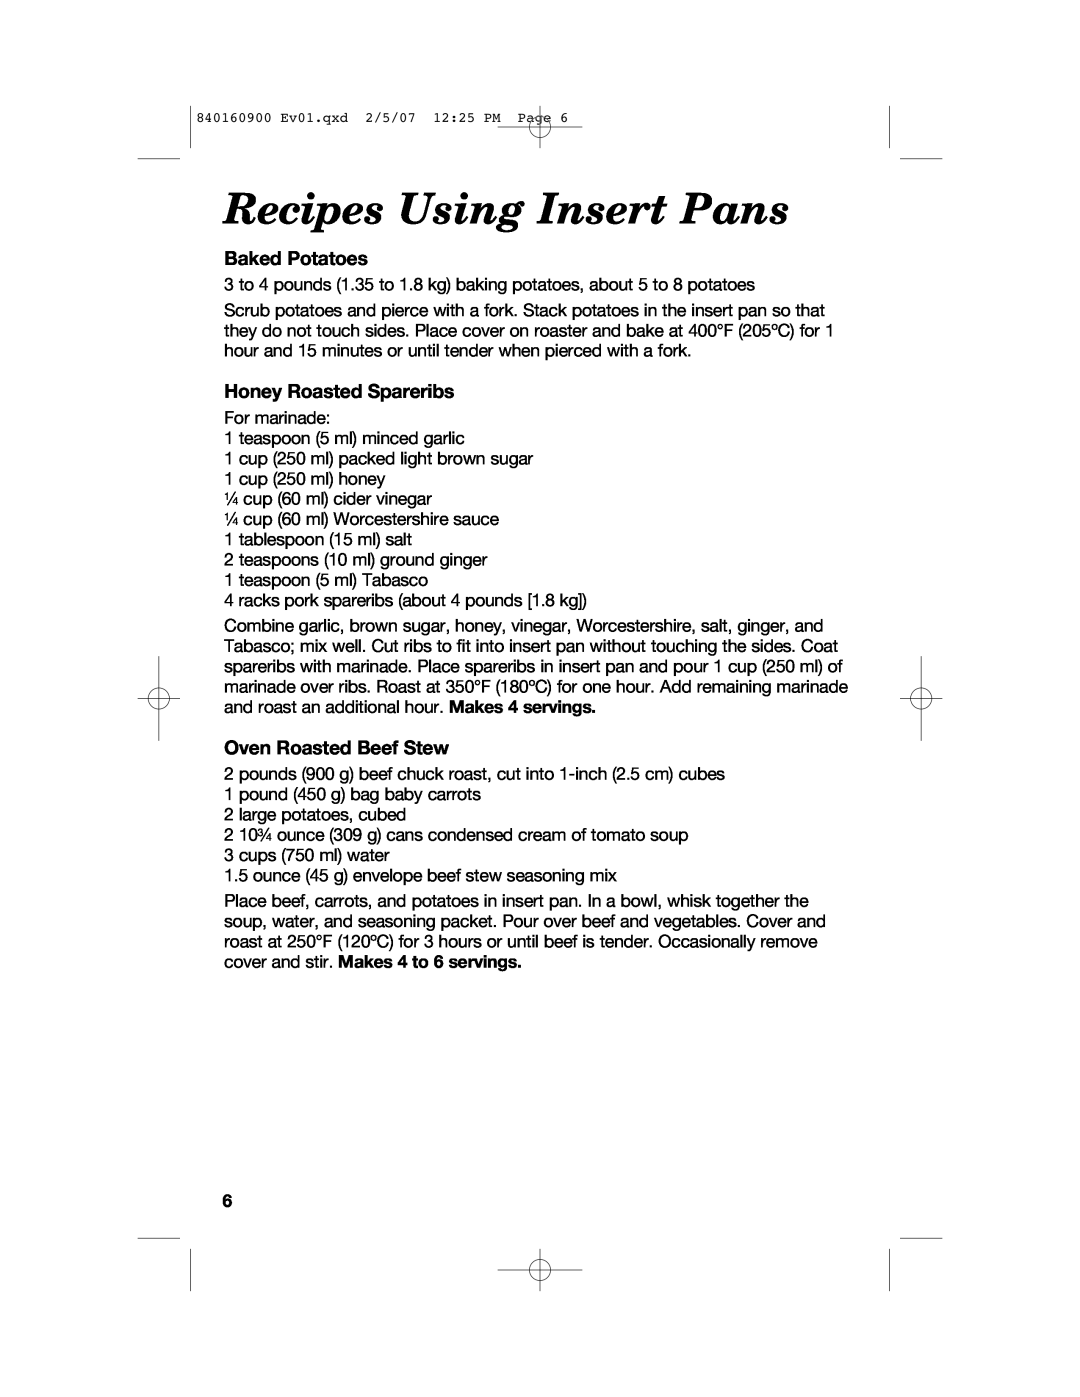 Proctor-Silex Roaster Oven Recipes Using Insert Pans, Baked Potatoes, Honey Roasted Spareribs, Oven Roasted Beef Stew 